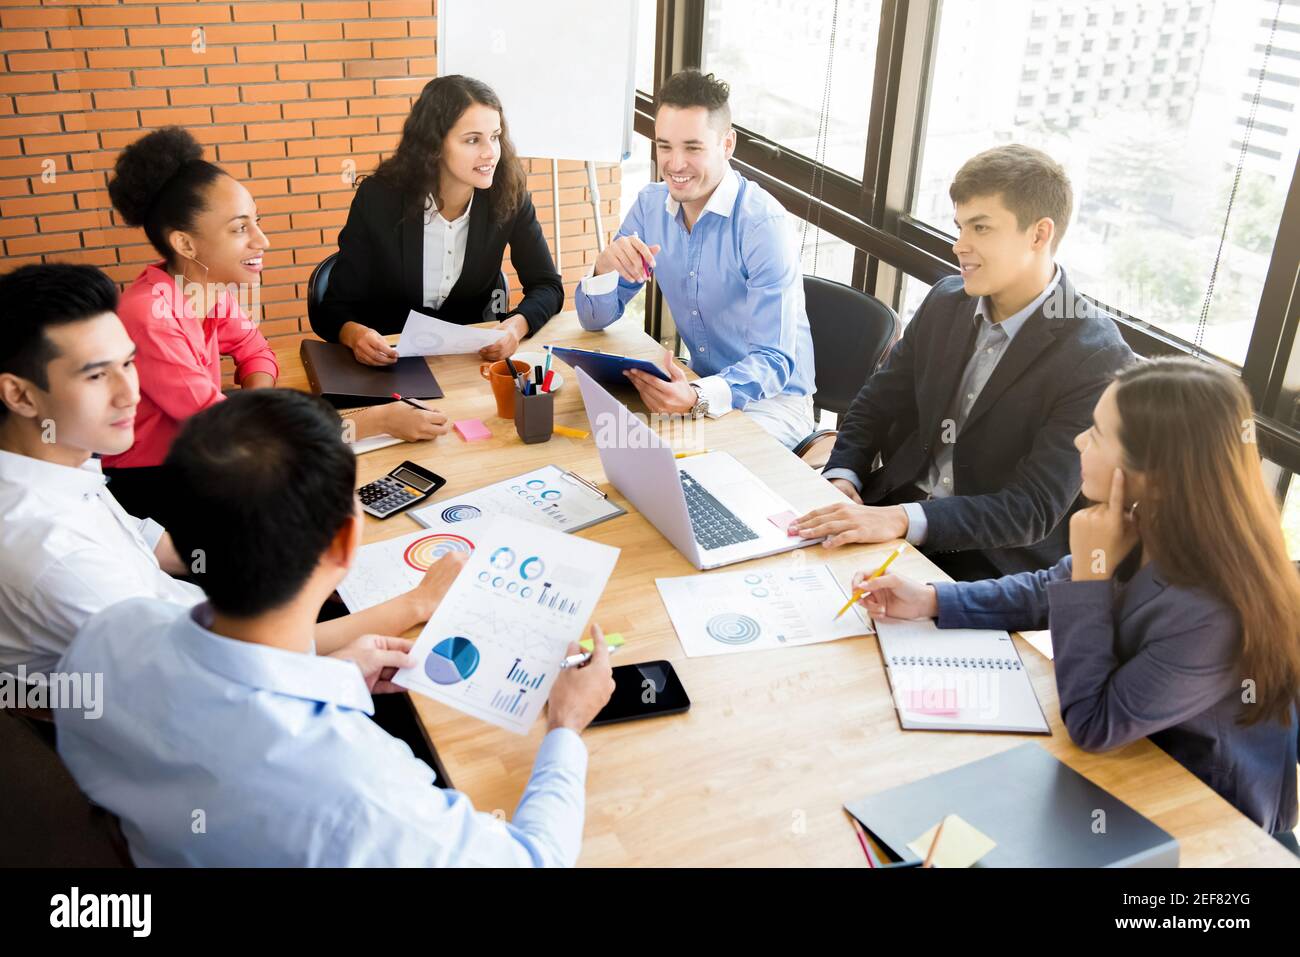 Group of multiethnic business people brainstorming in the meeting room Stock Photo